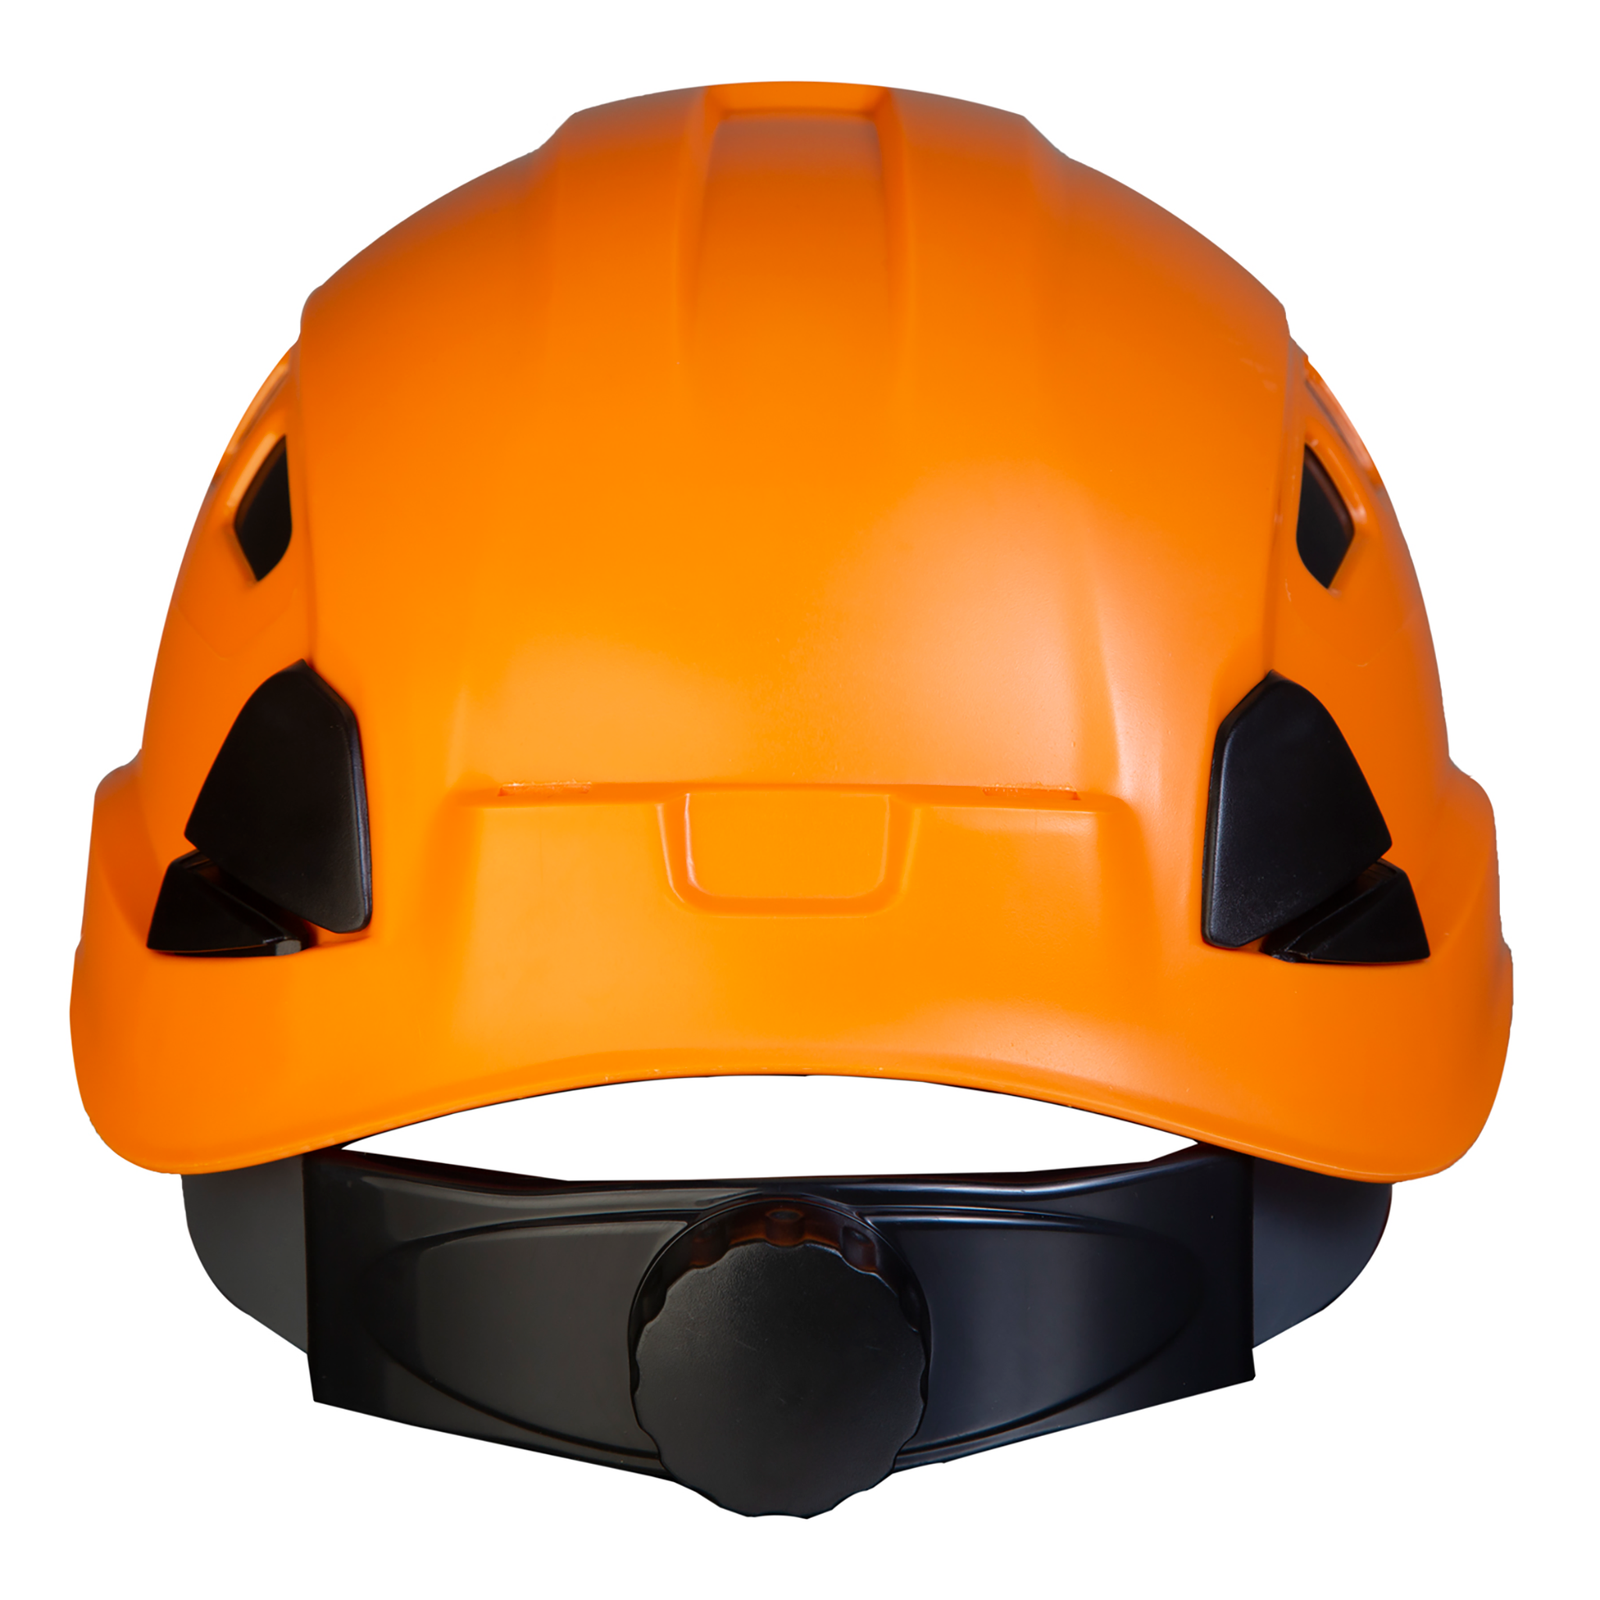 The Jorestech orange ventilated hard hat with adjustable 6 point suspension, black ratchet system and clamps for head light